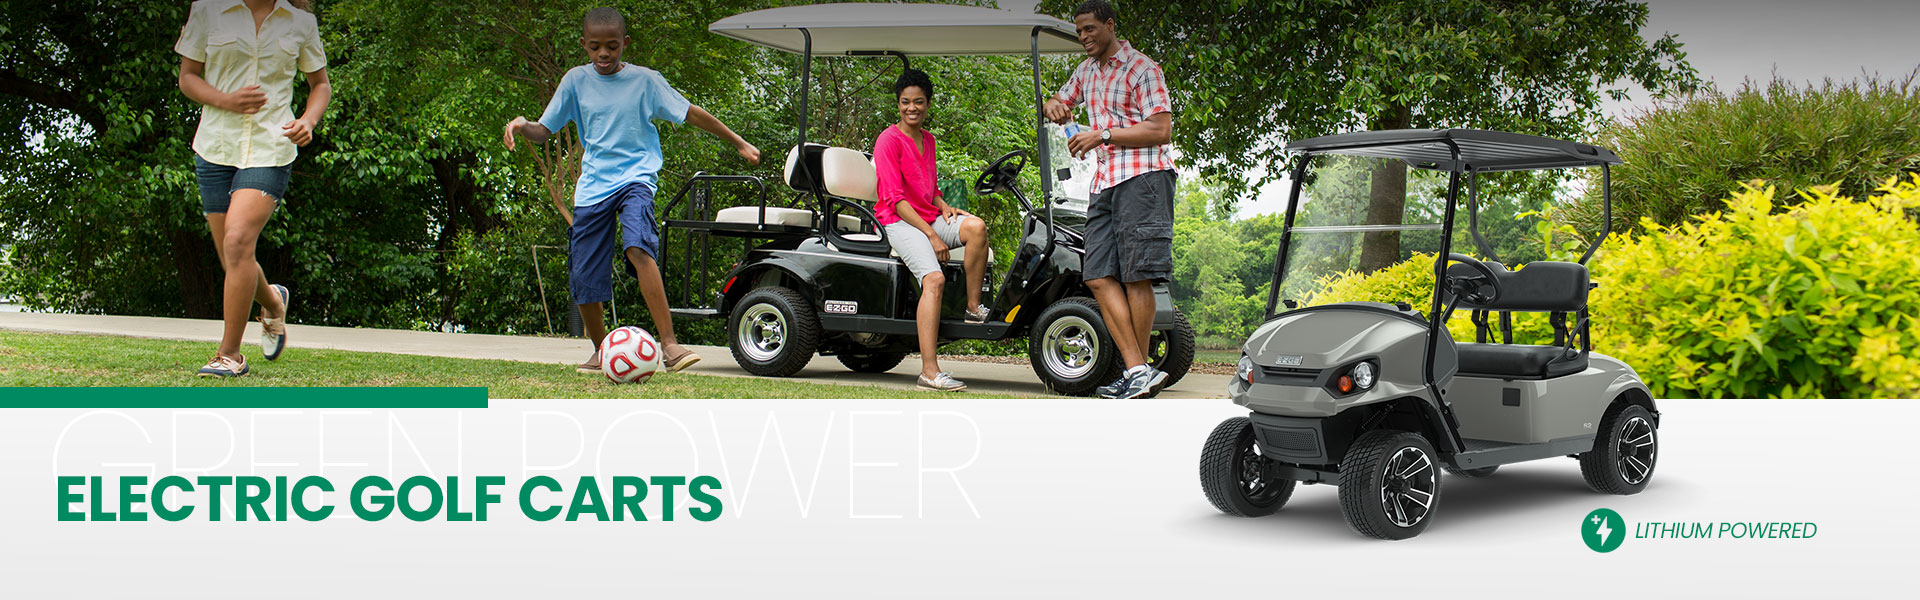 Shop Electric Golf Carts from Top Brands